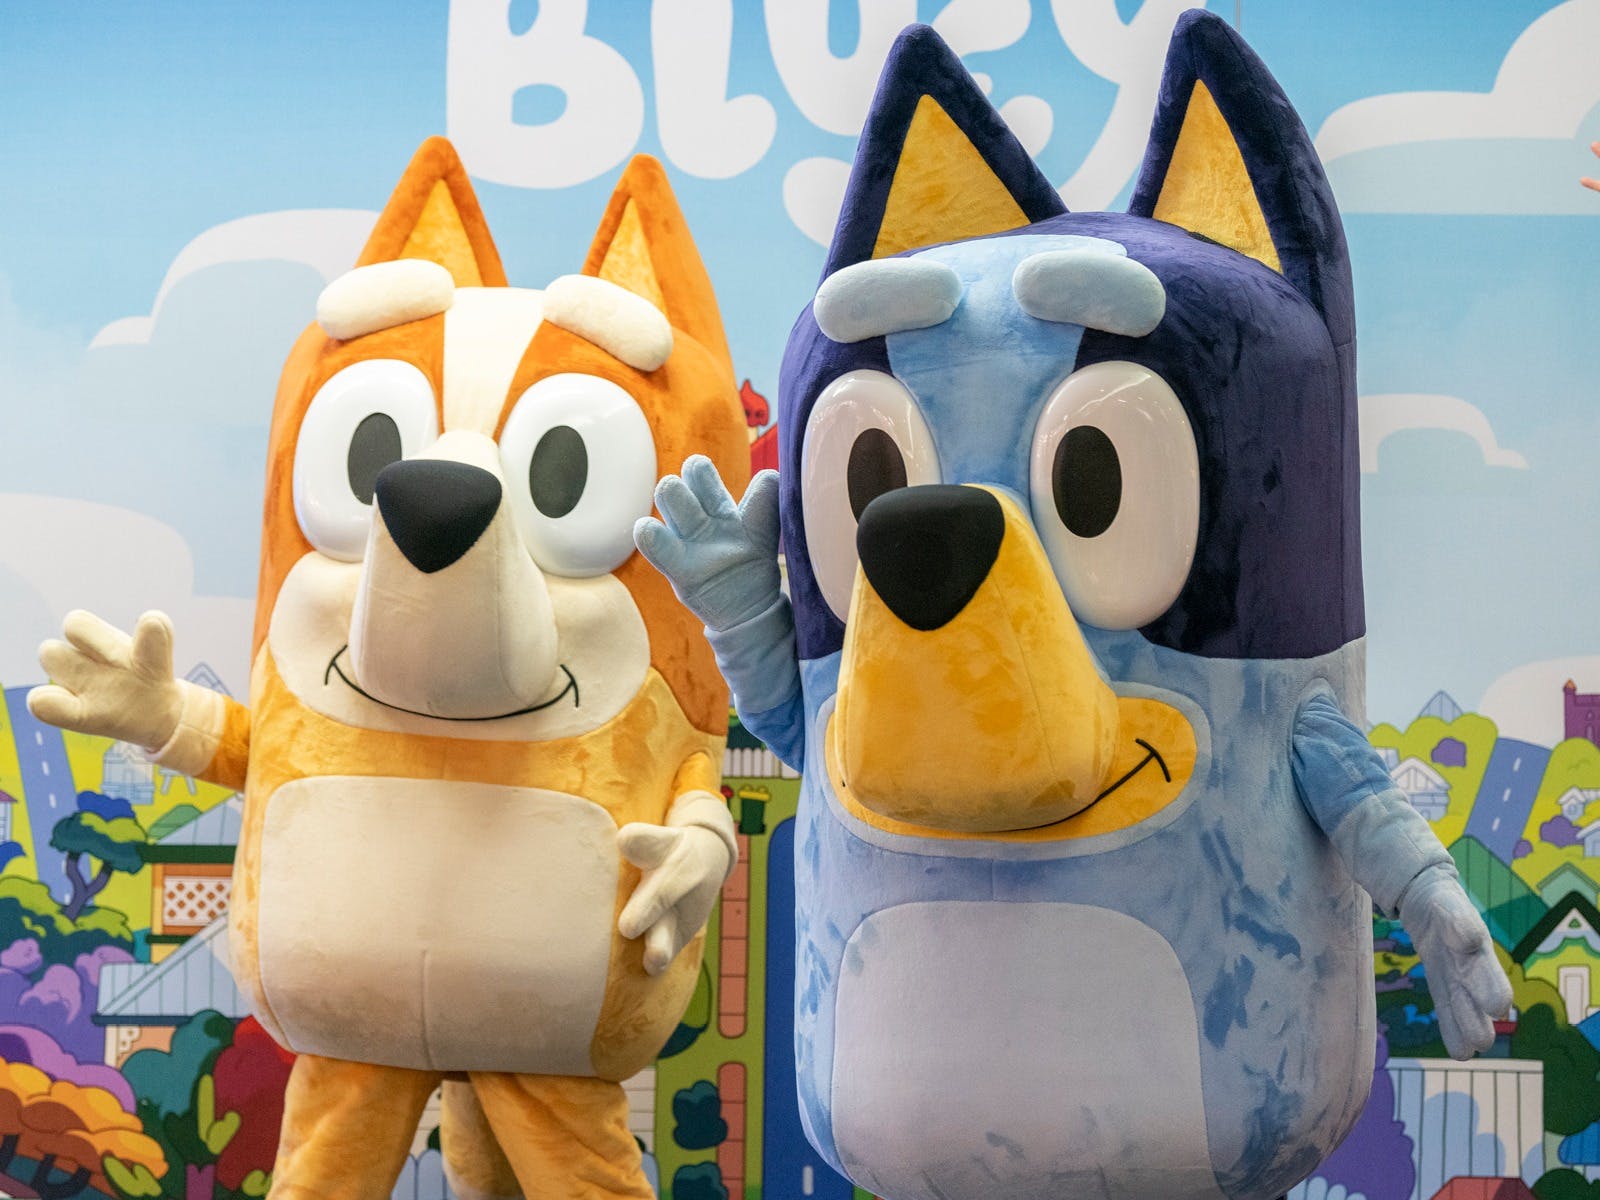 Bluey & Bingo Live Interactive Experience has performed in Ipswich at Tulmur Place